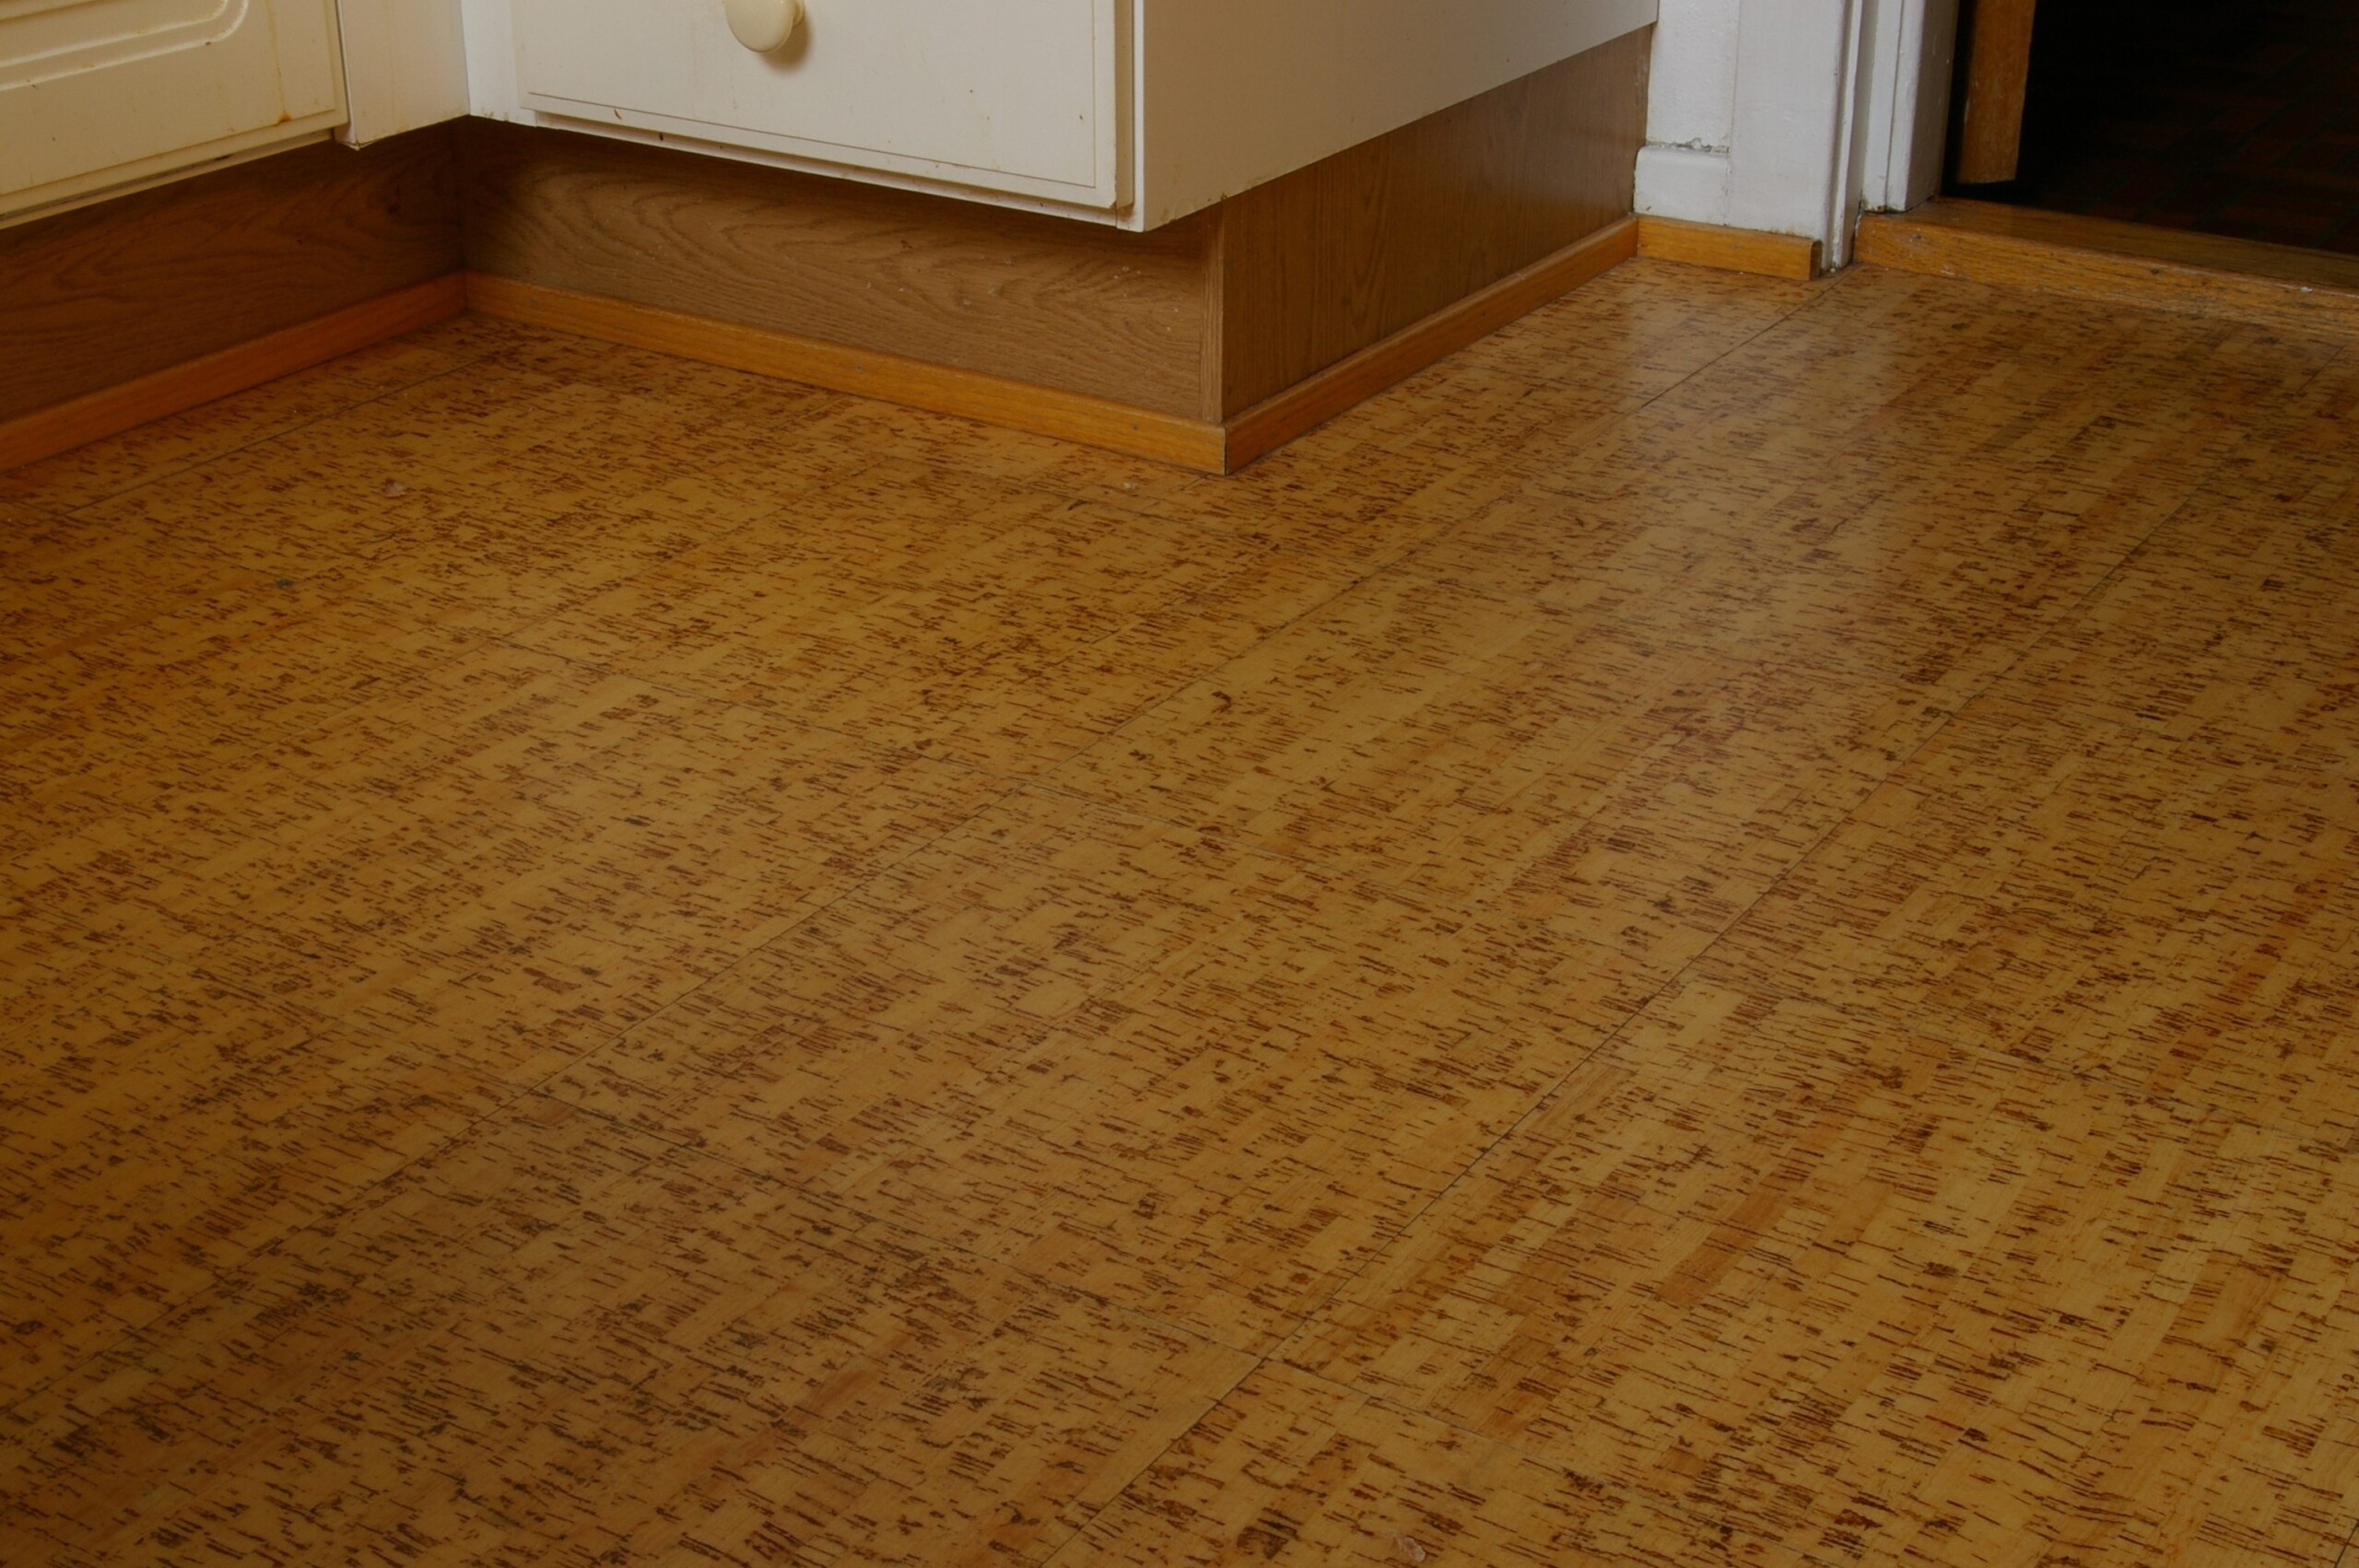 Should You Invest in Cork Flooring - Aspen Luxury Homes for Sale